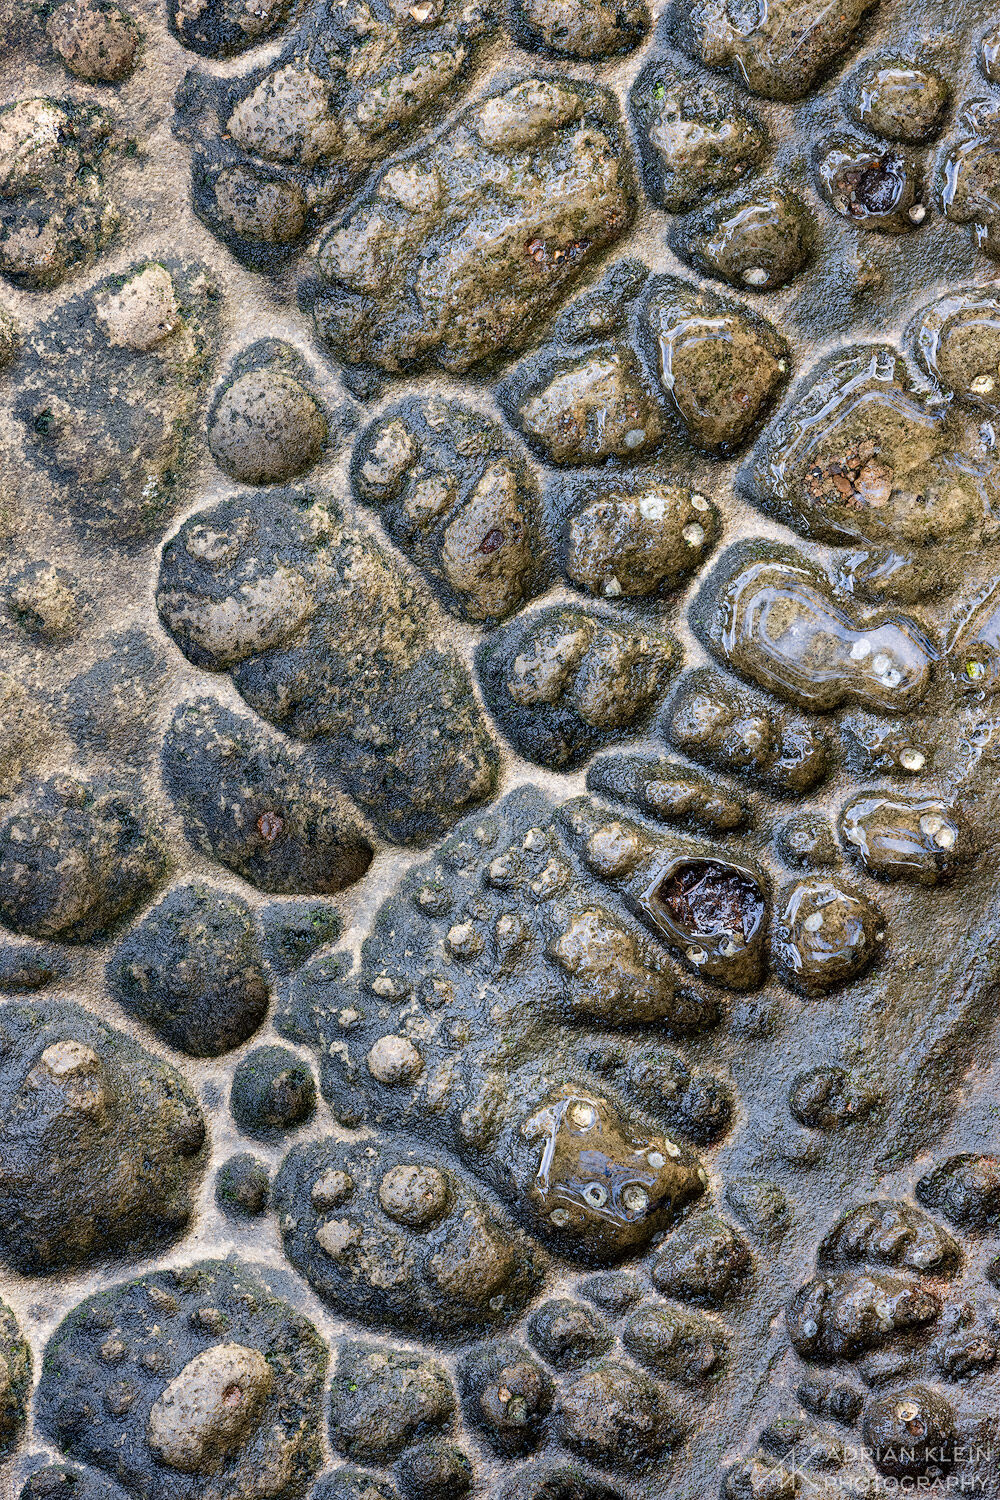 Sandstone worn out from the ocean waves creating unique texture and shapes.